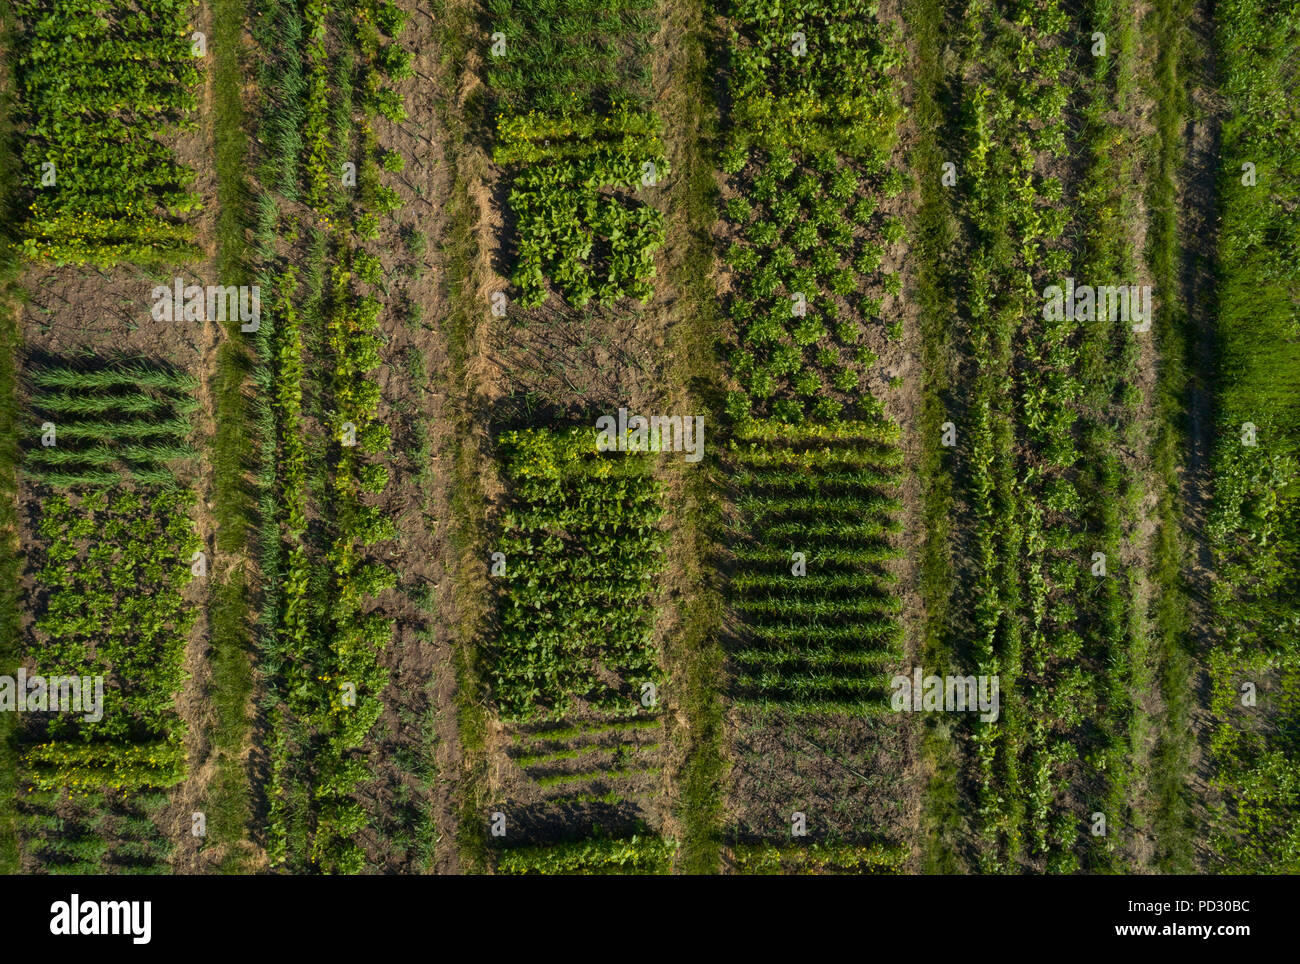 Rows and patches of crops on agricultural land Stock Photo